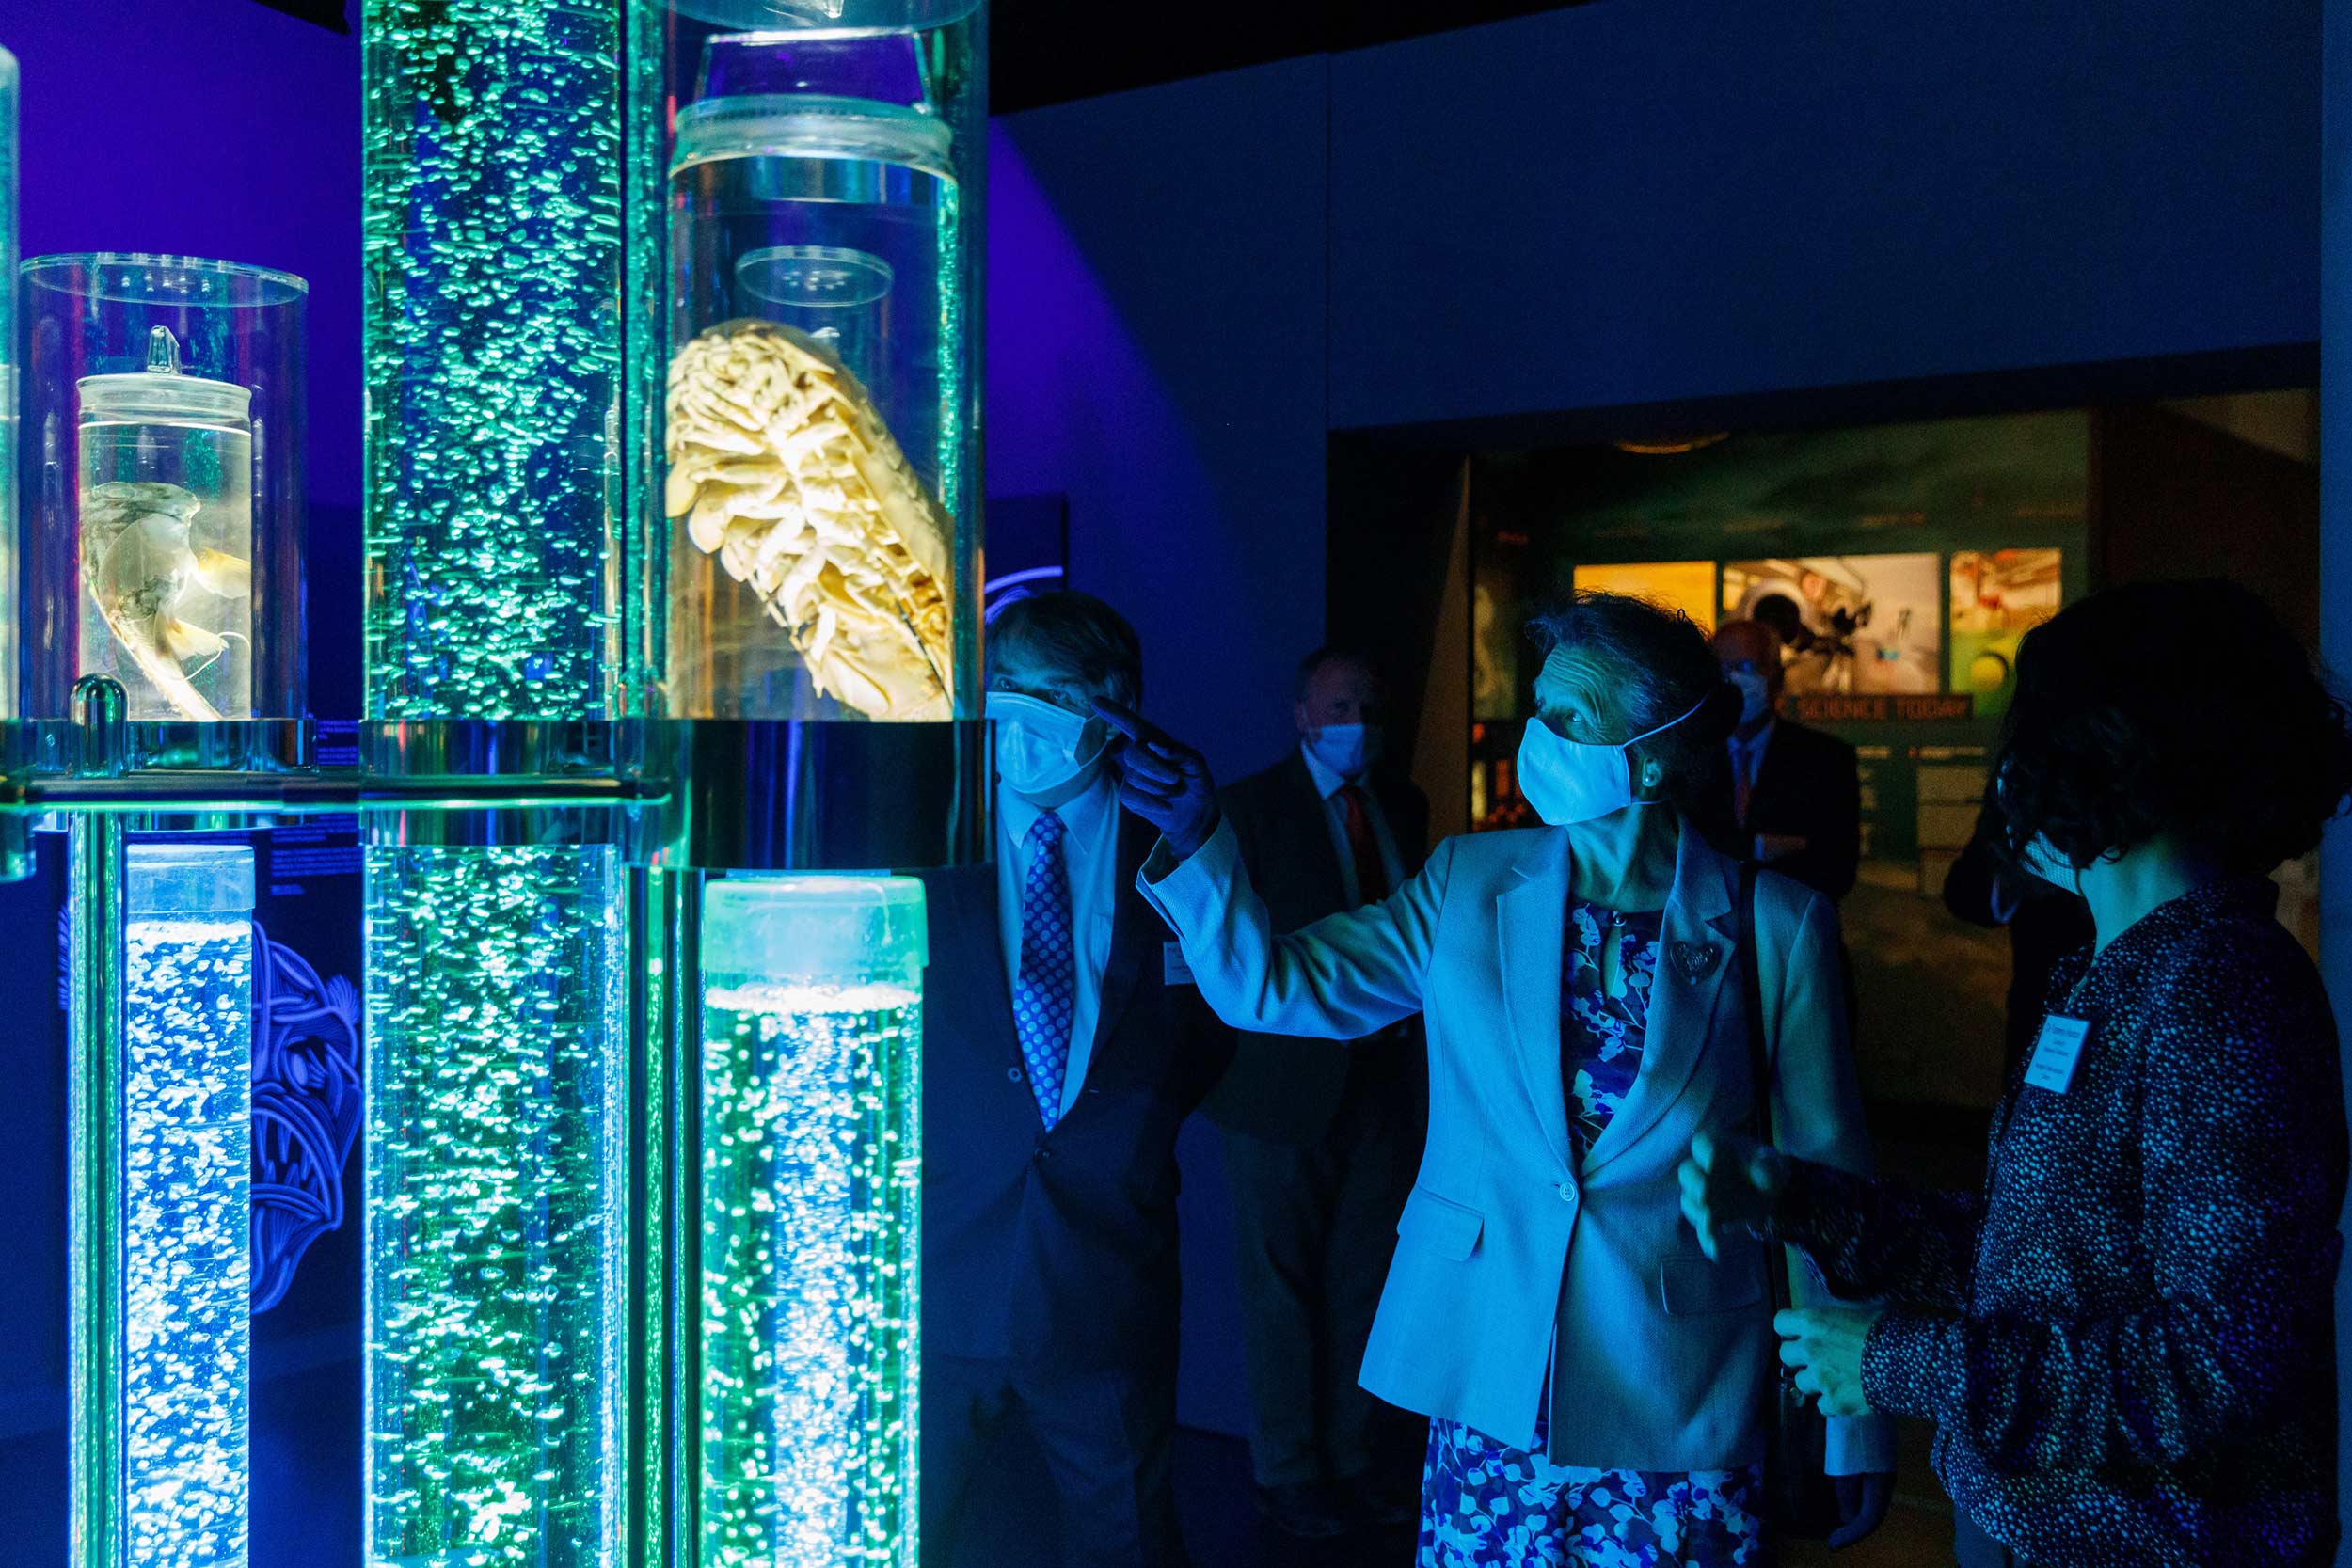 Princess Anne examines a display in the Museum's 'Monsters of the Deep' exhibition.